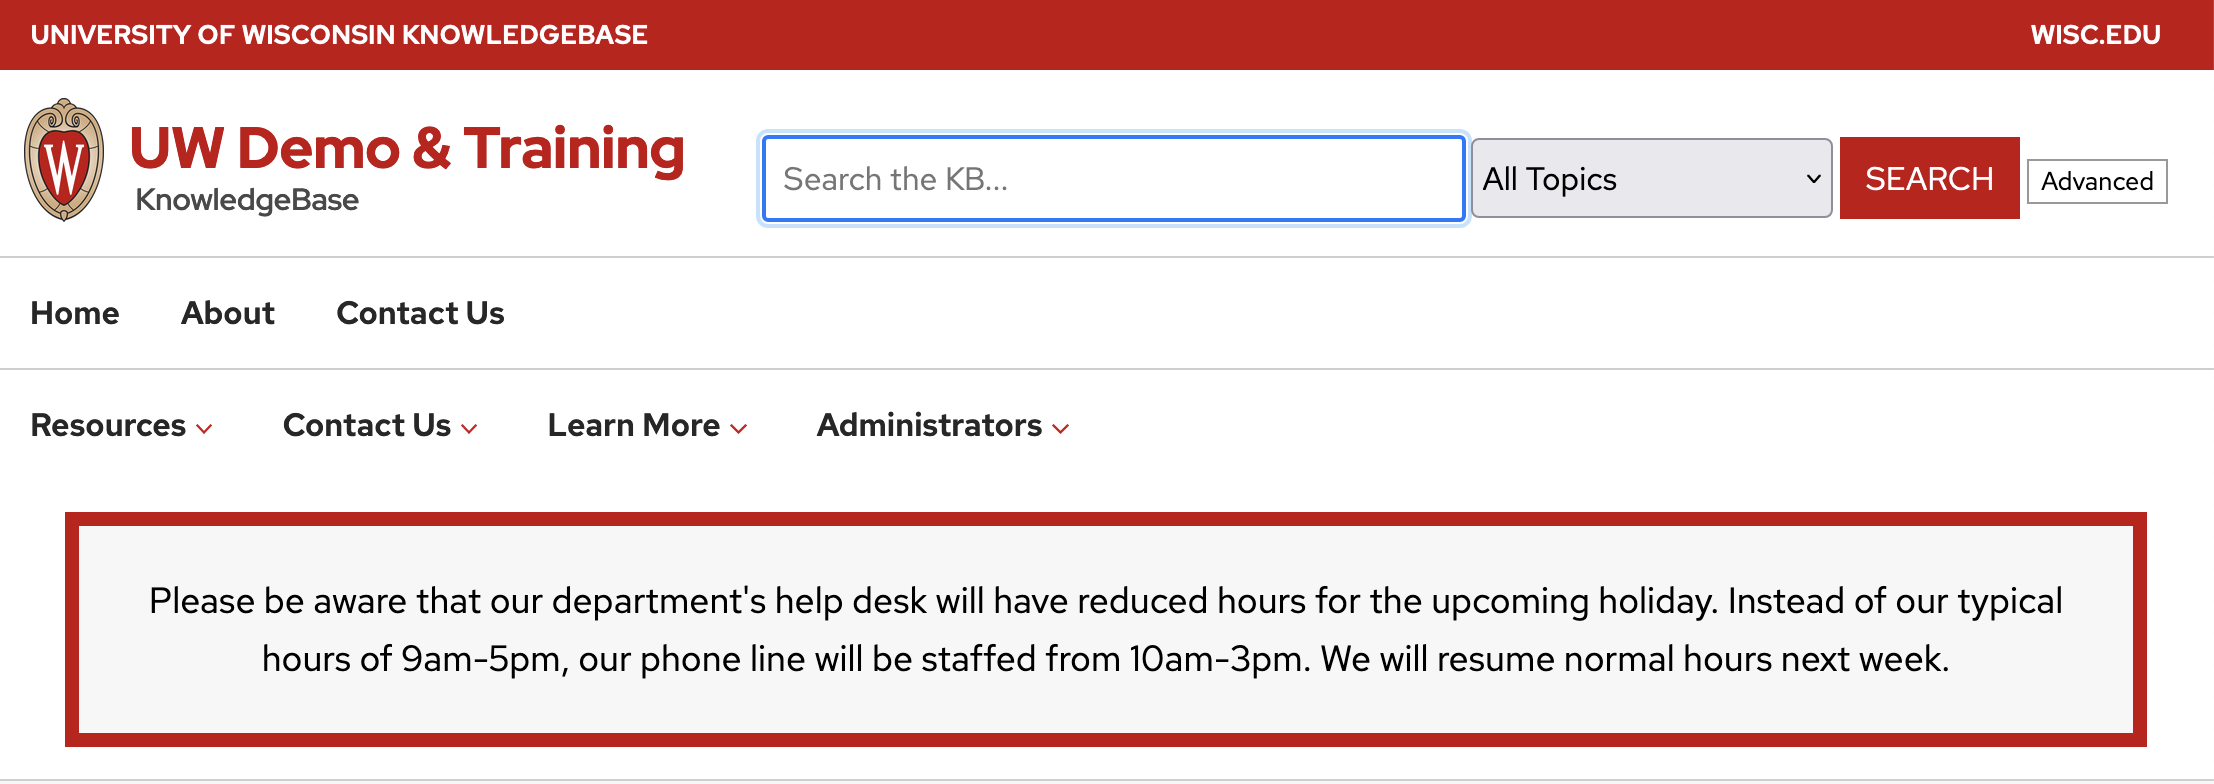 The banner will be part of the site header and will come after any navigation menus that have been added to the site header. For UW-Madison sites, the banner will have a gray background and thick red border. An example of banner content is shown which reads "Please be aware that our department's help desk will have reduced hours for the upcoming holiday. Instead of our typical hours of 9am-5pm, our phone line will be staffed from 10am-3pm. We will resume normal hours next week."